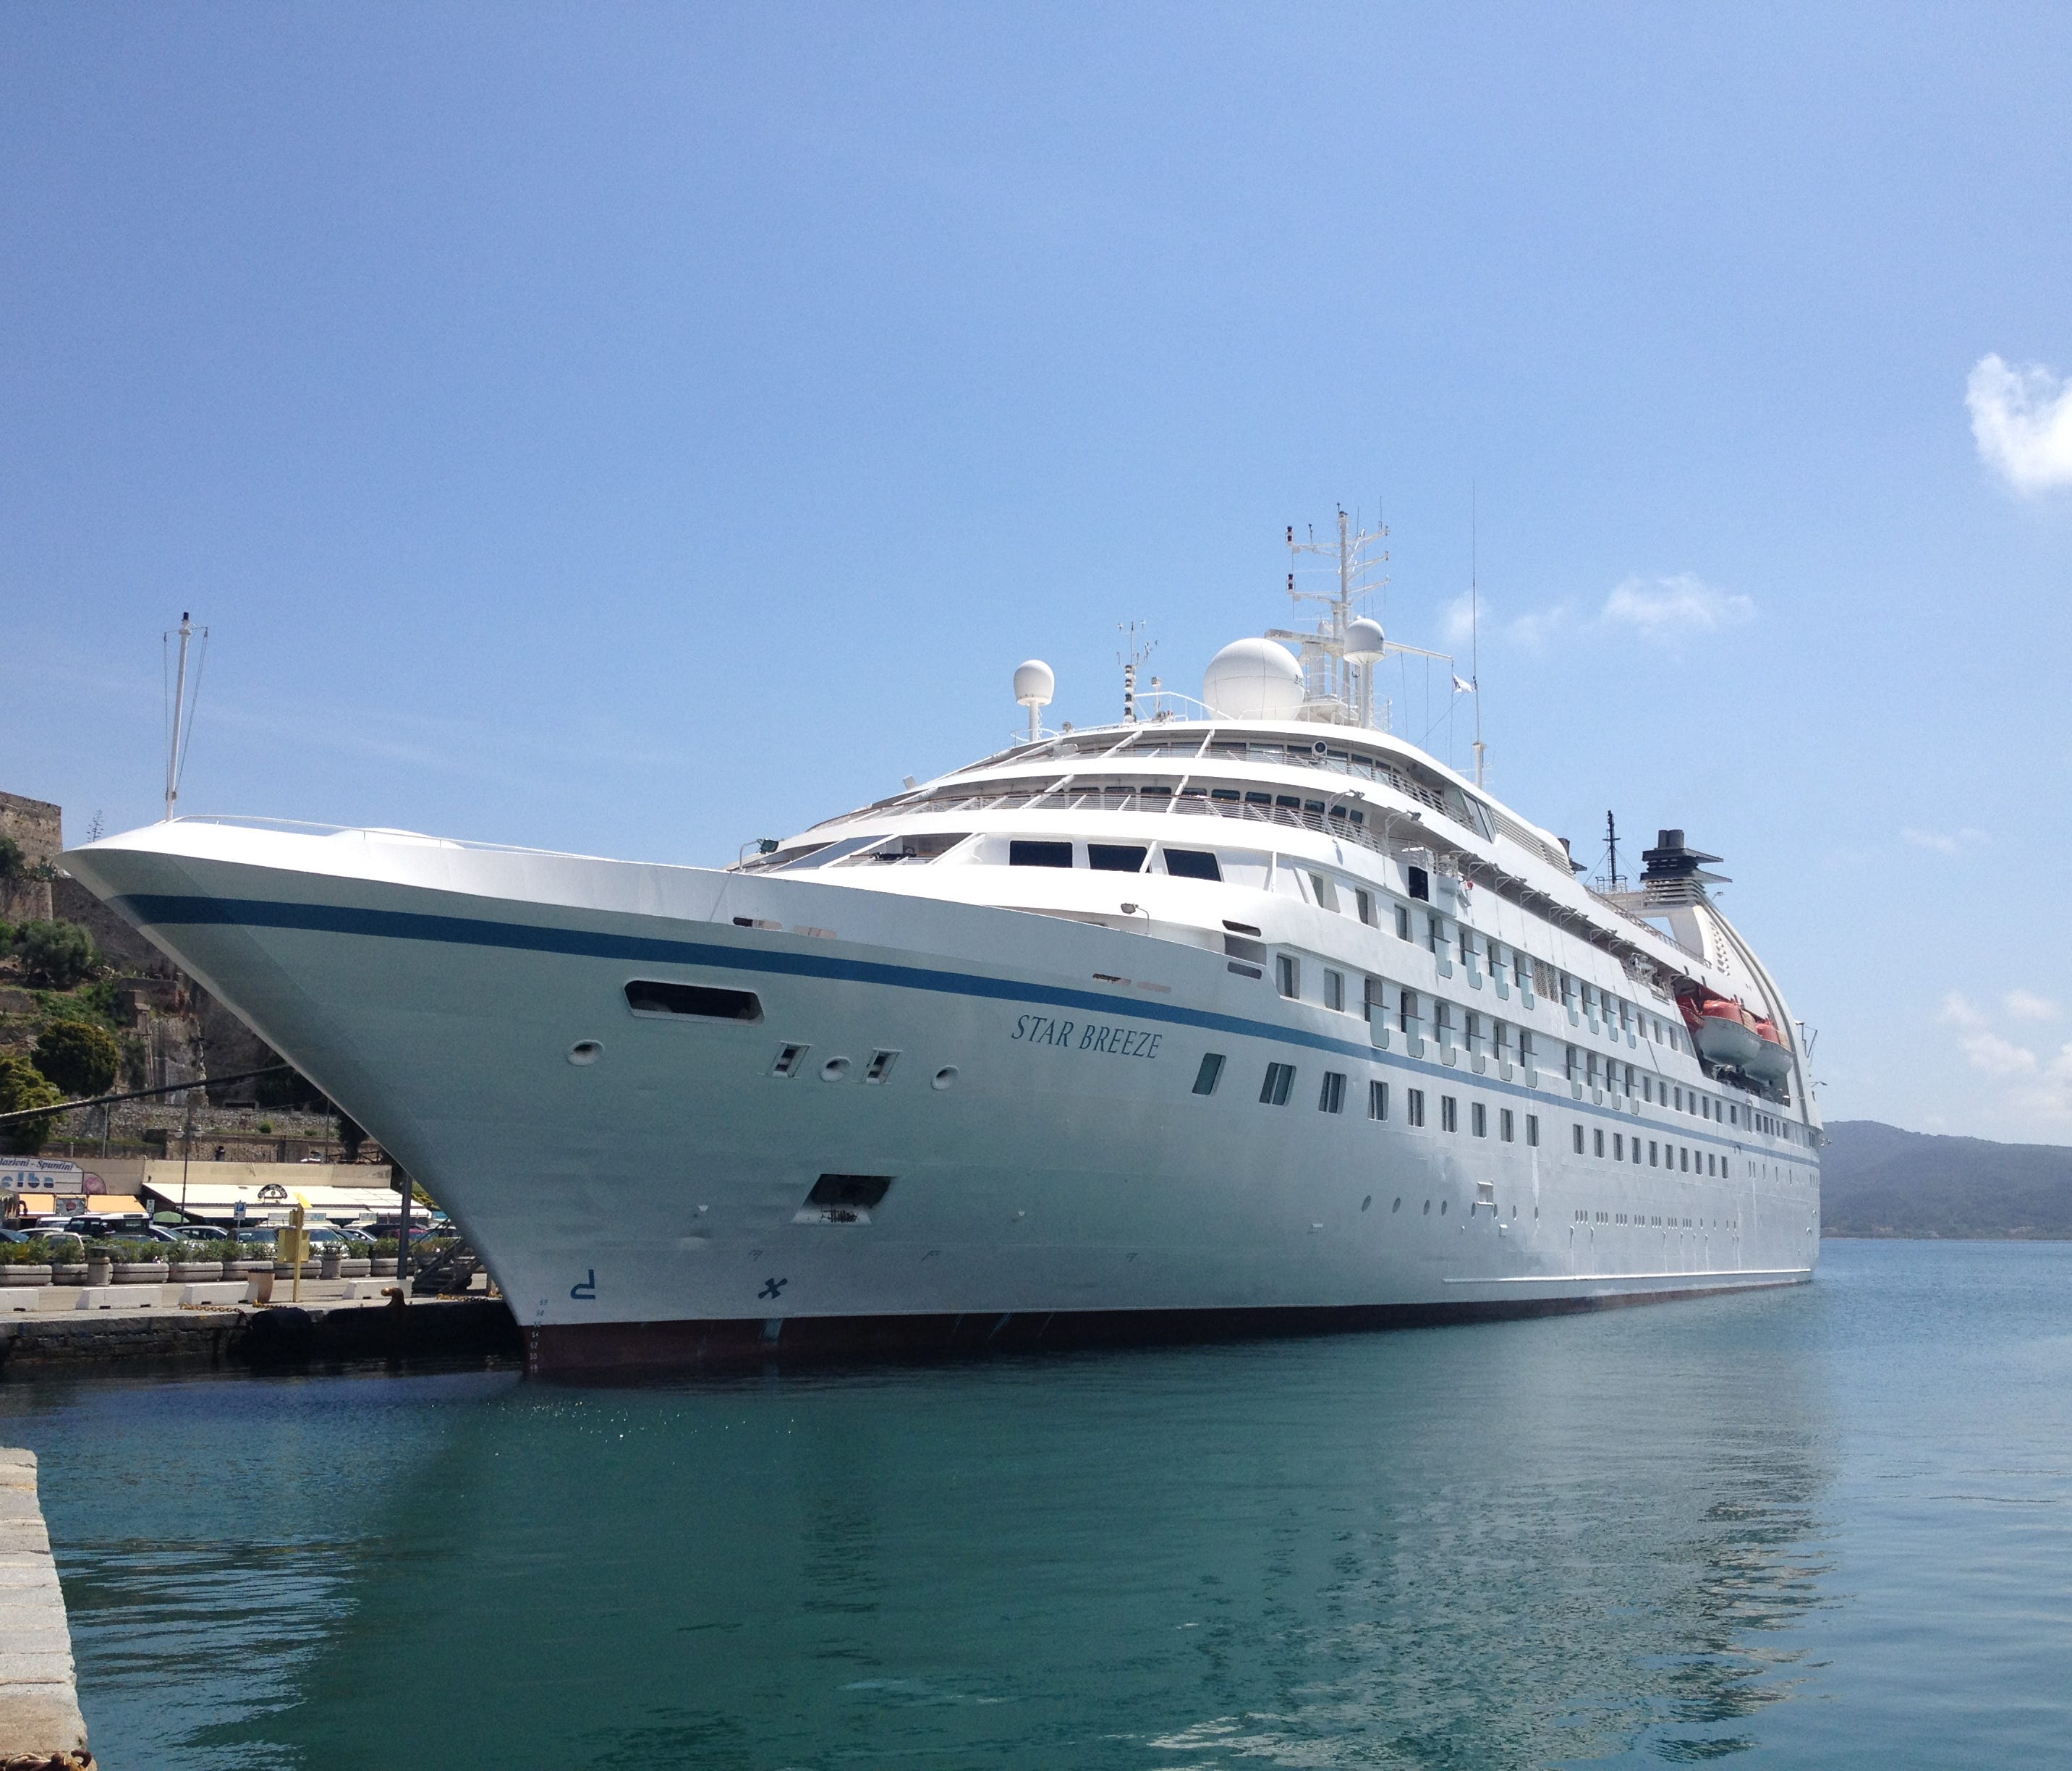 Christened at a ceremony in Nice, France on May 6, 2015, the 212-passenger Star Breeze is Windstar Cruises' second new ship in a year.